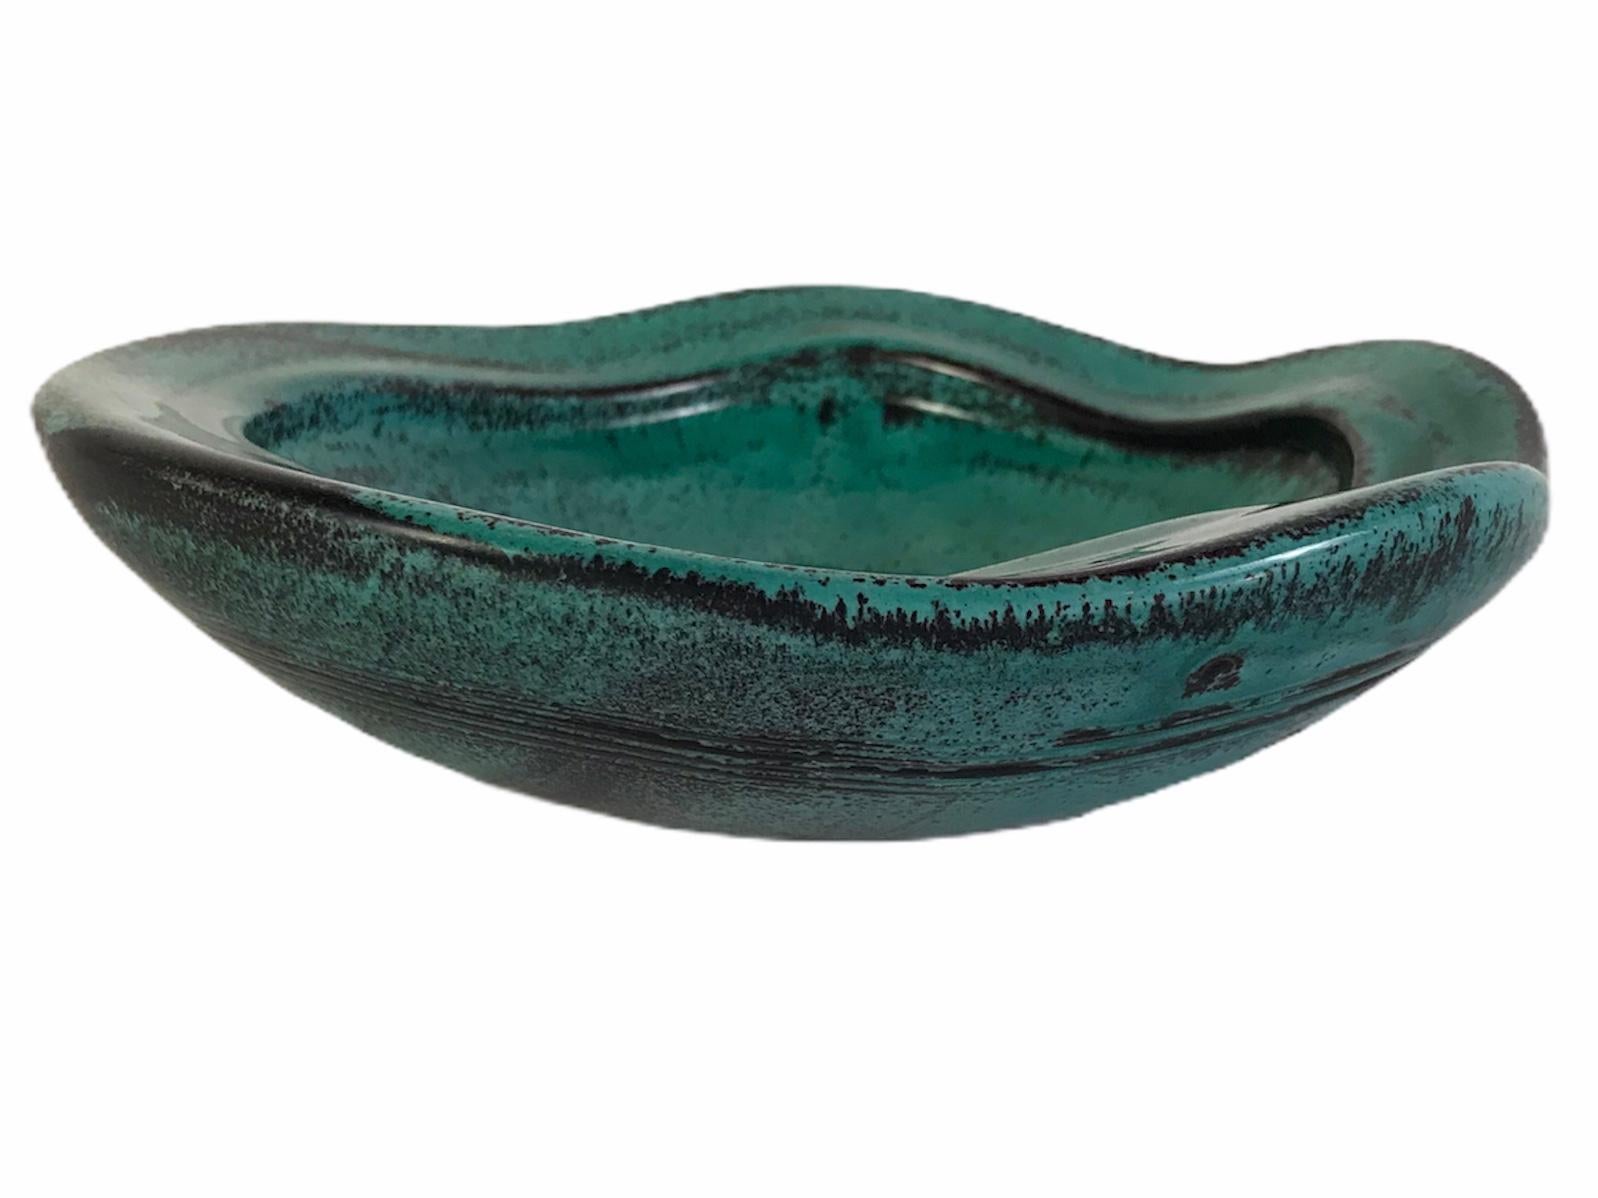 Danish designer Svend Hammershoi created this low freeform ceramic bowl in the 1930s for Kahler Keramiske. Beautiful vessel in mottled malachite green with black brown outline and a fluid undulating edge. Incised bands and concentric circles design